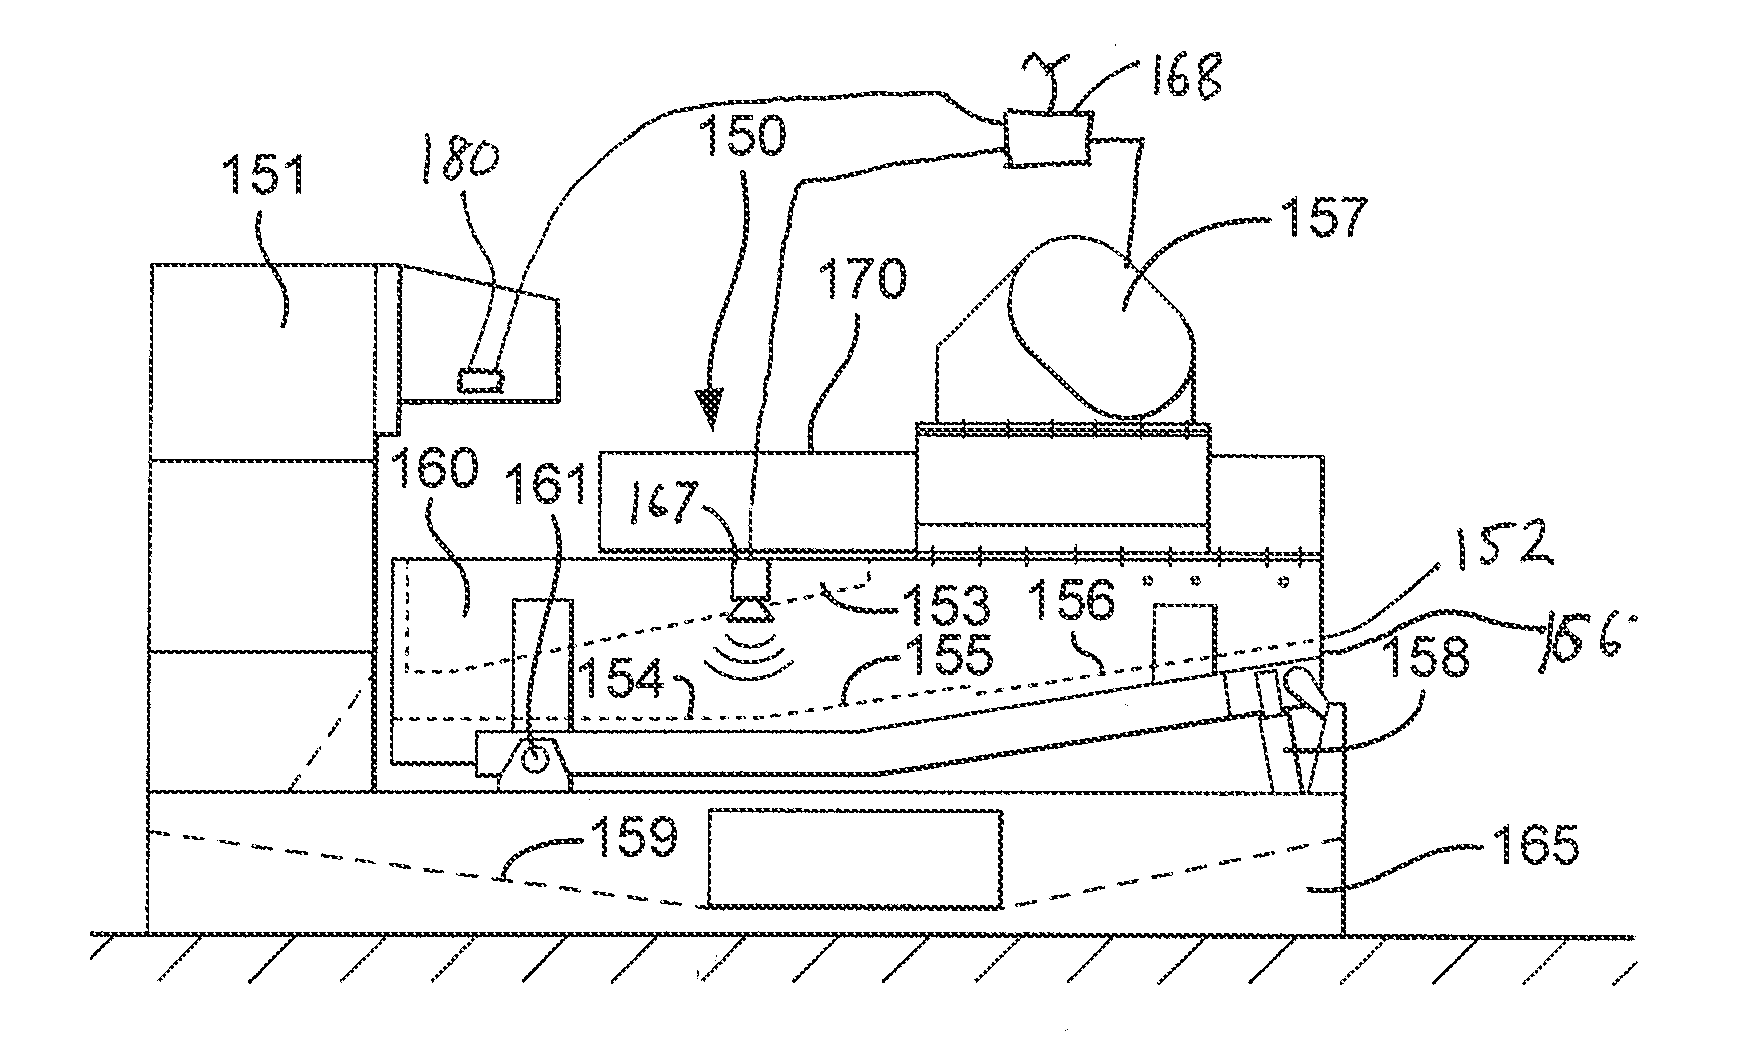 Apparatus and method for separating solids from a solids laden drilling fluid